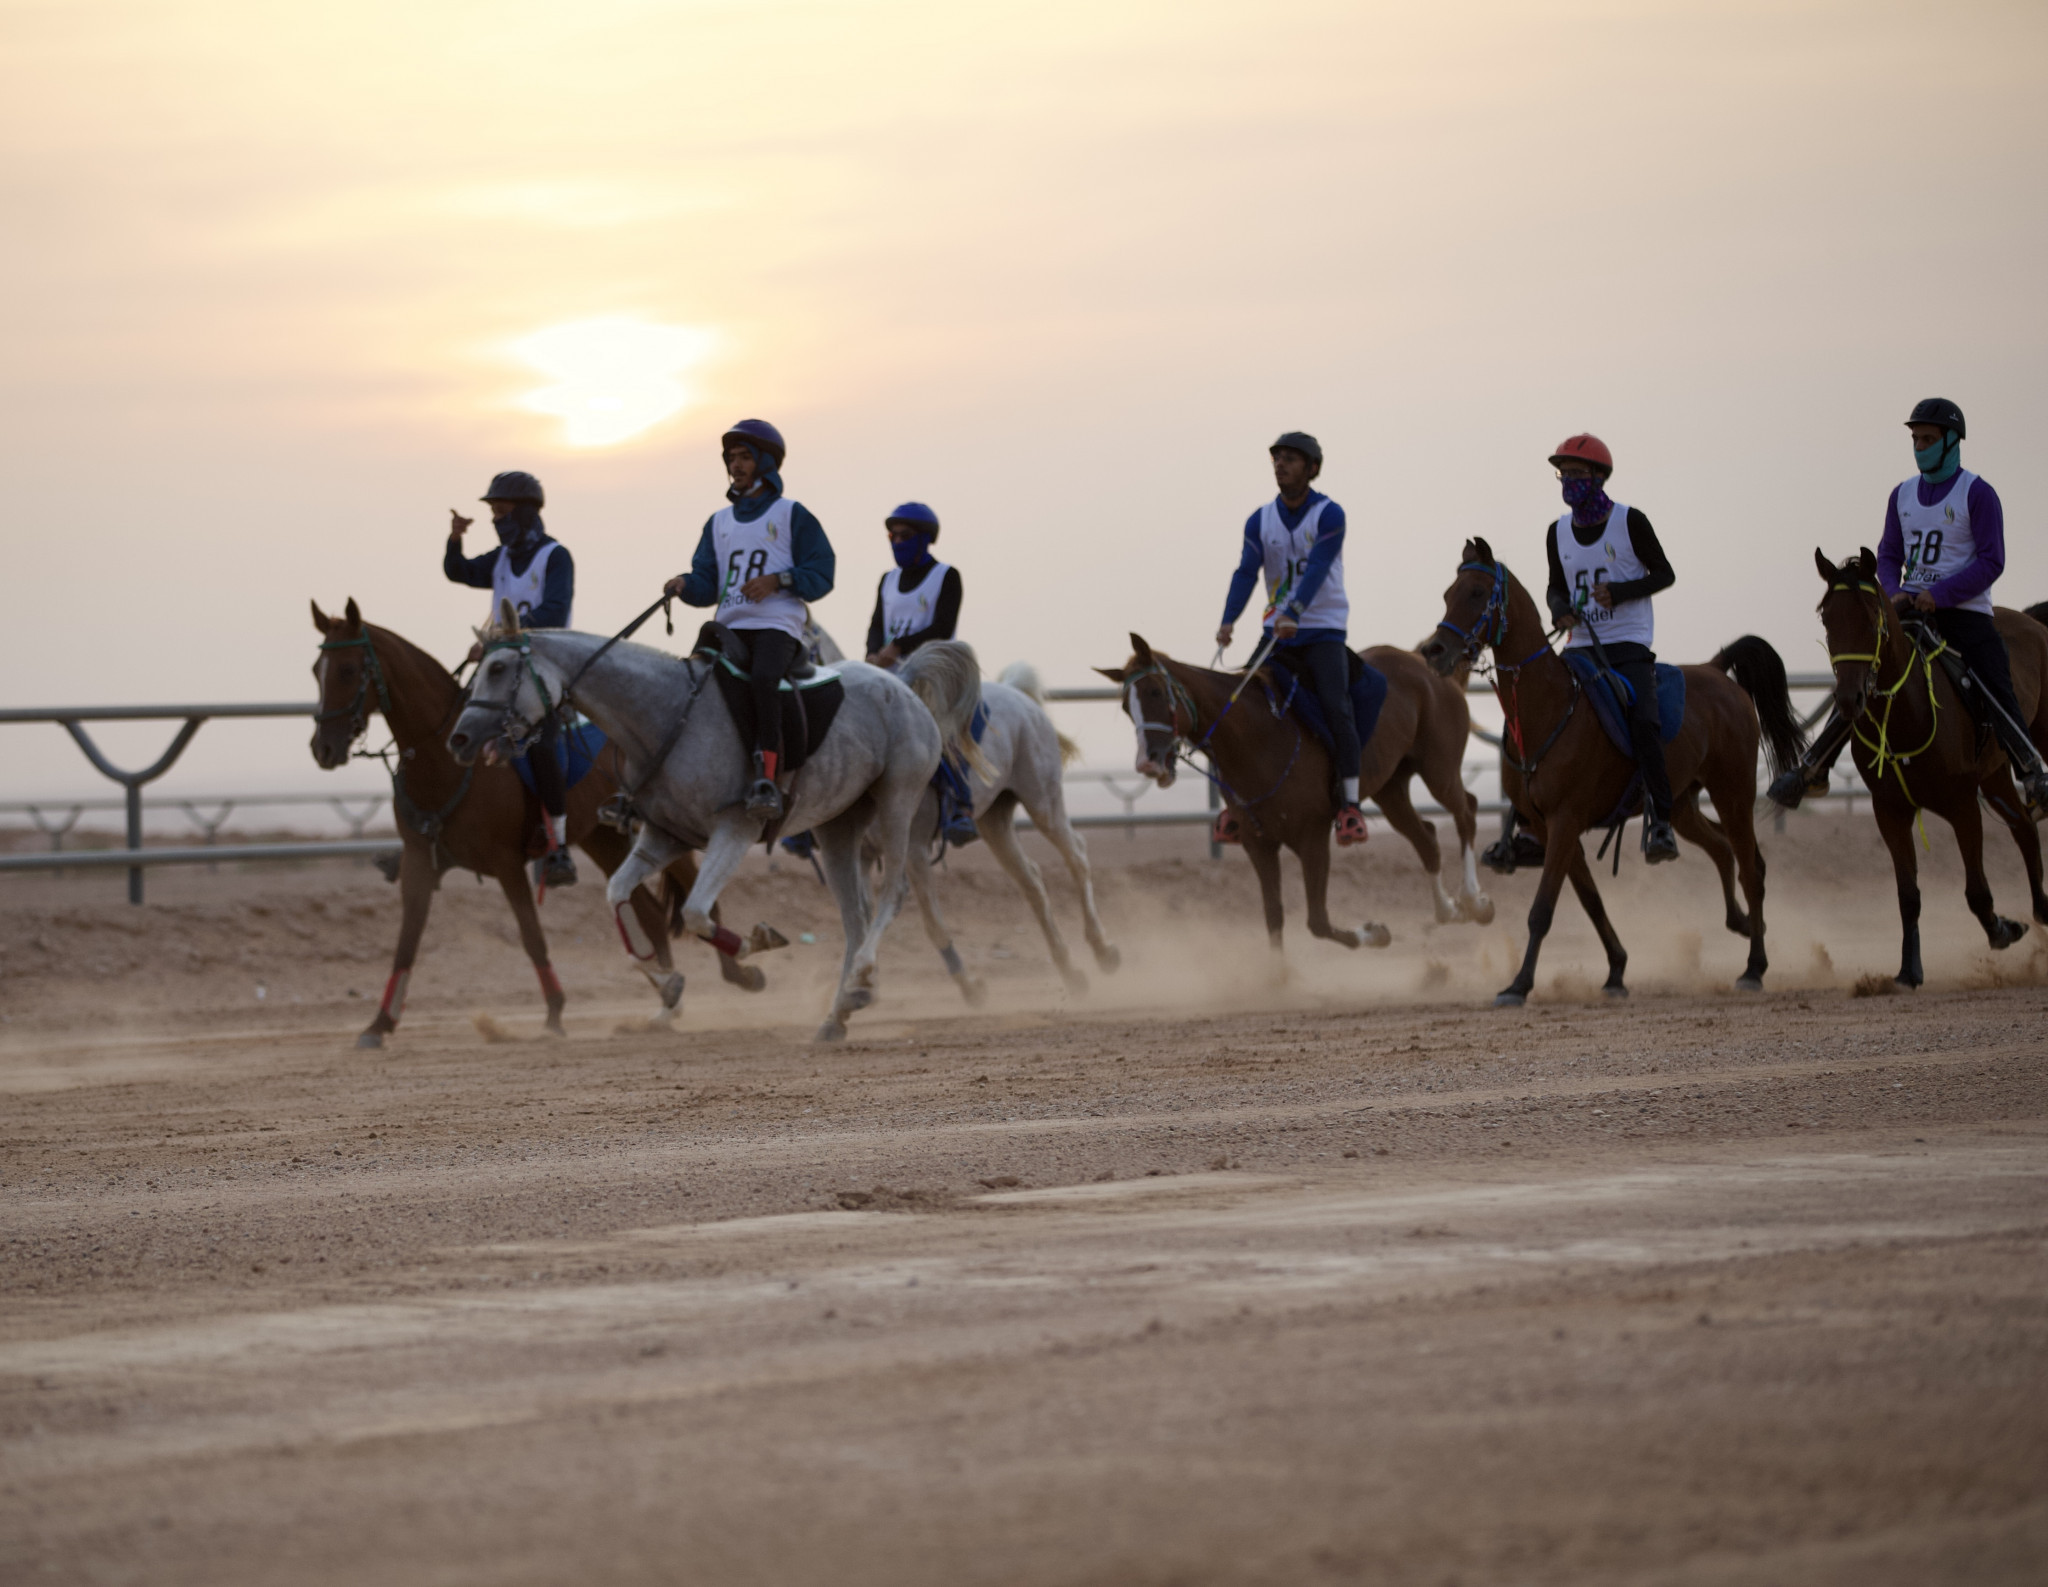 Riders raced to the finish in the equestrian endurance mixed team competition ©Saudi Games